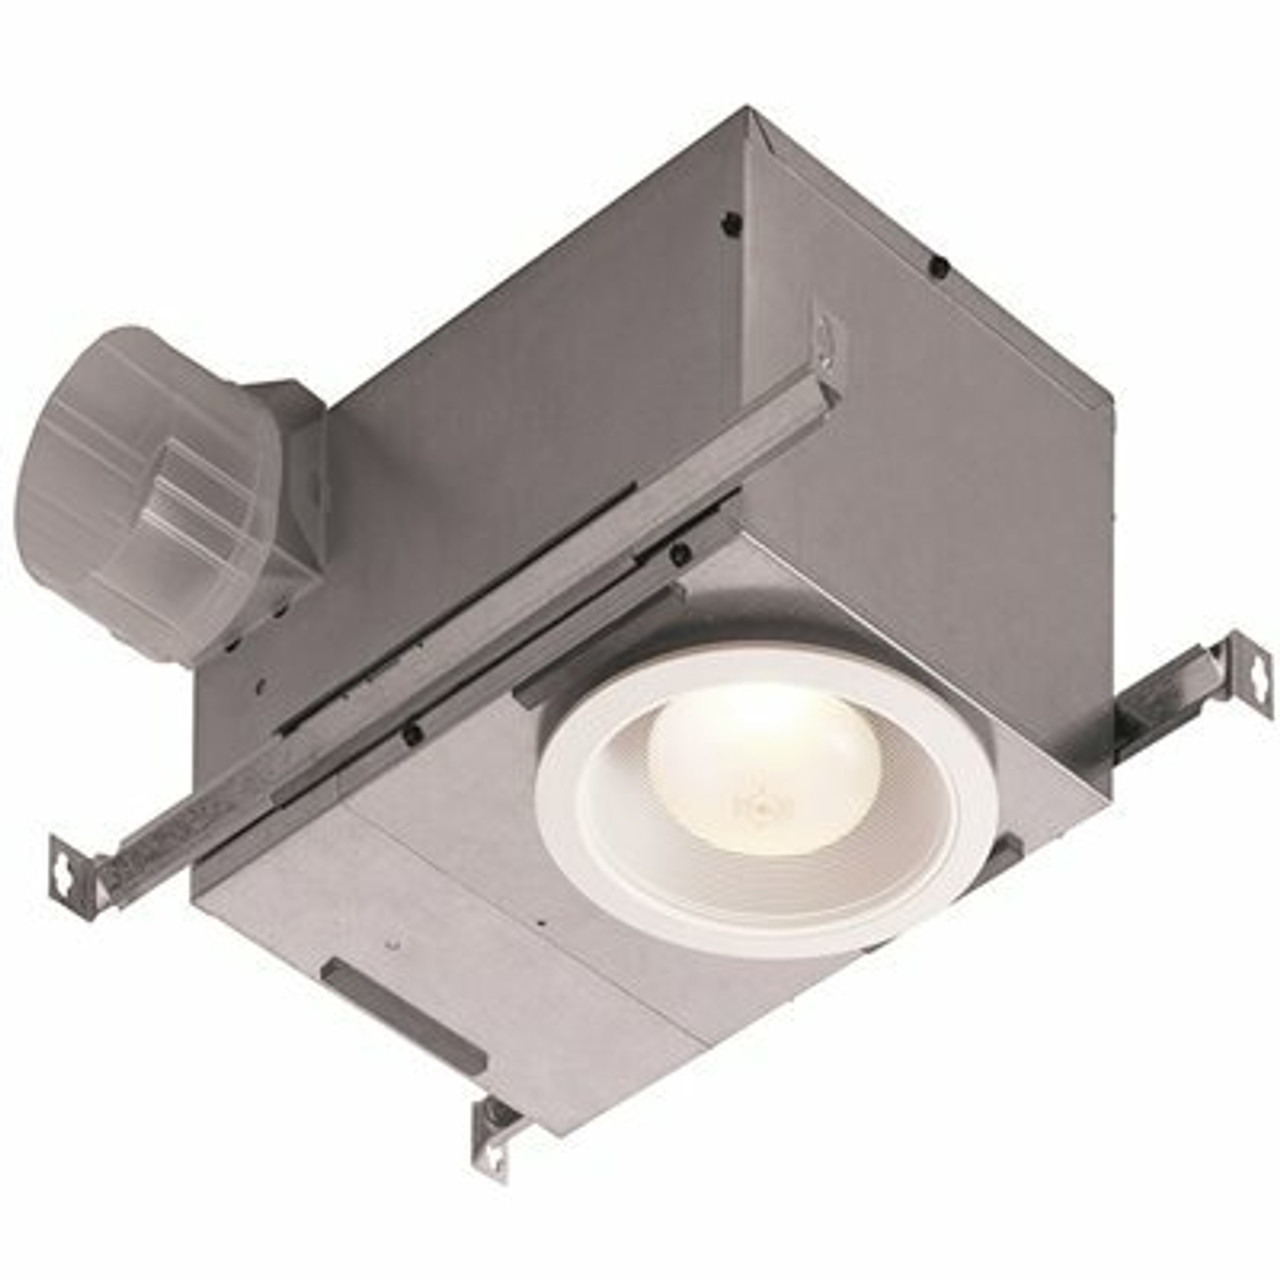 Broan-Nutone 70 Cfm White Exhaust Fan With Light